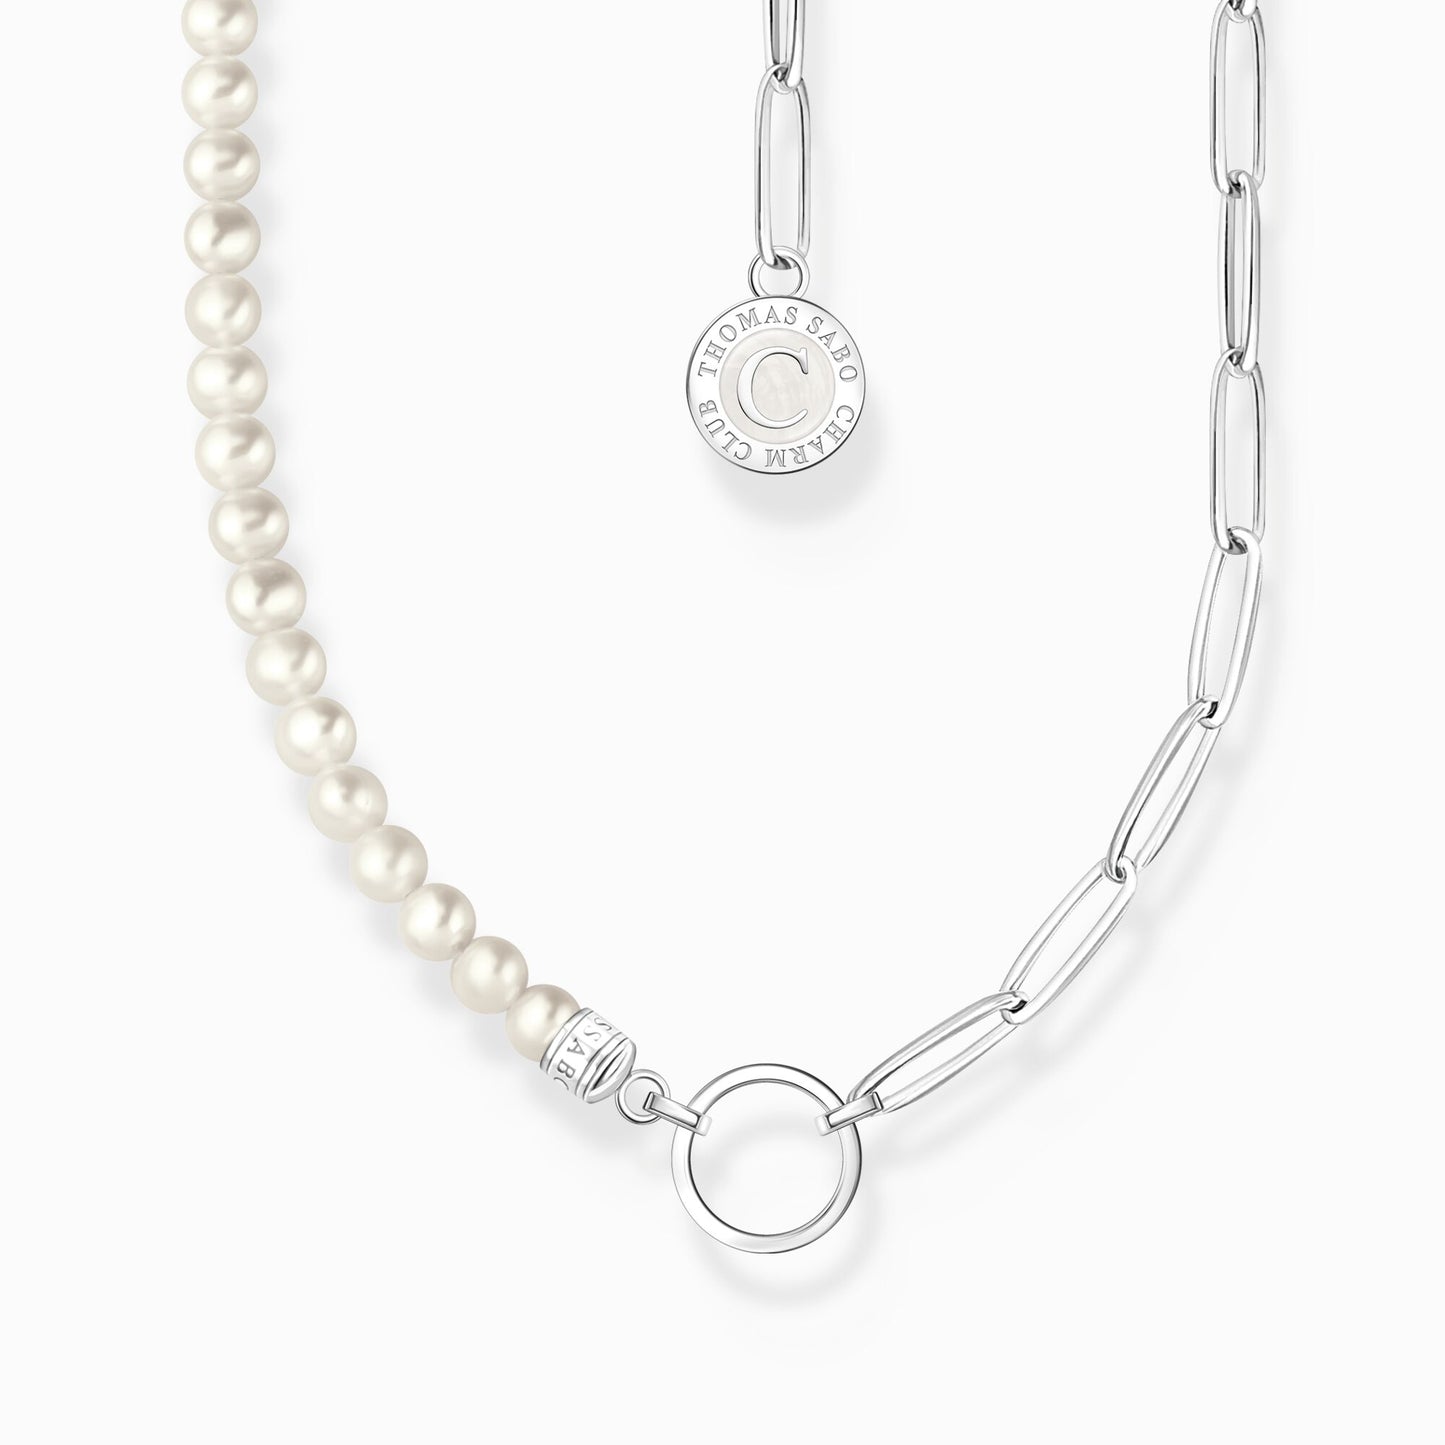 Thomas Sabo Member Charm Necklace With White Pearls And Charmista Coin Silver KE2189-158-14-L45